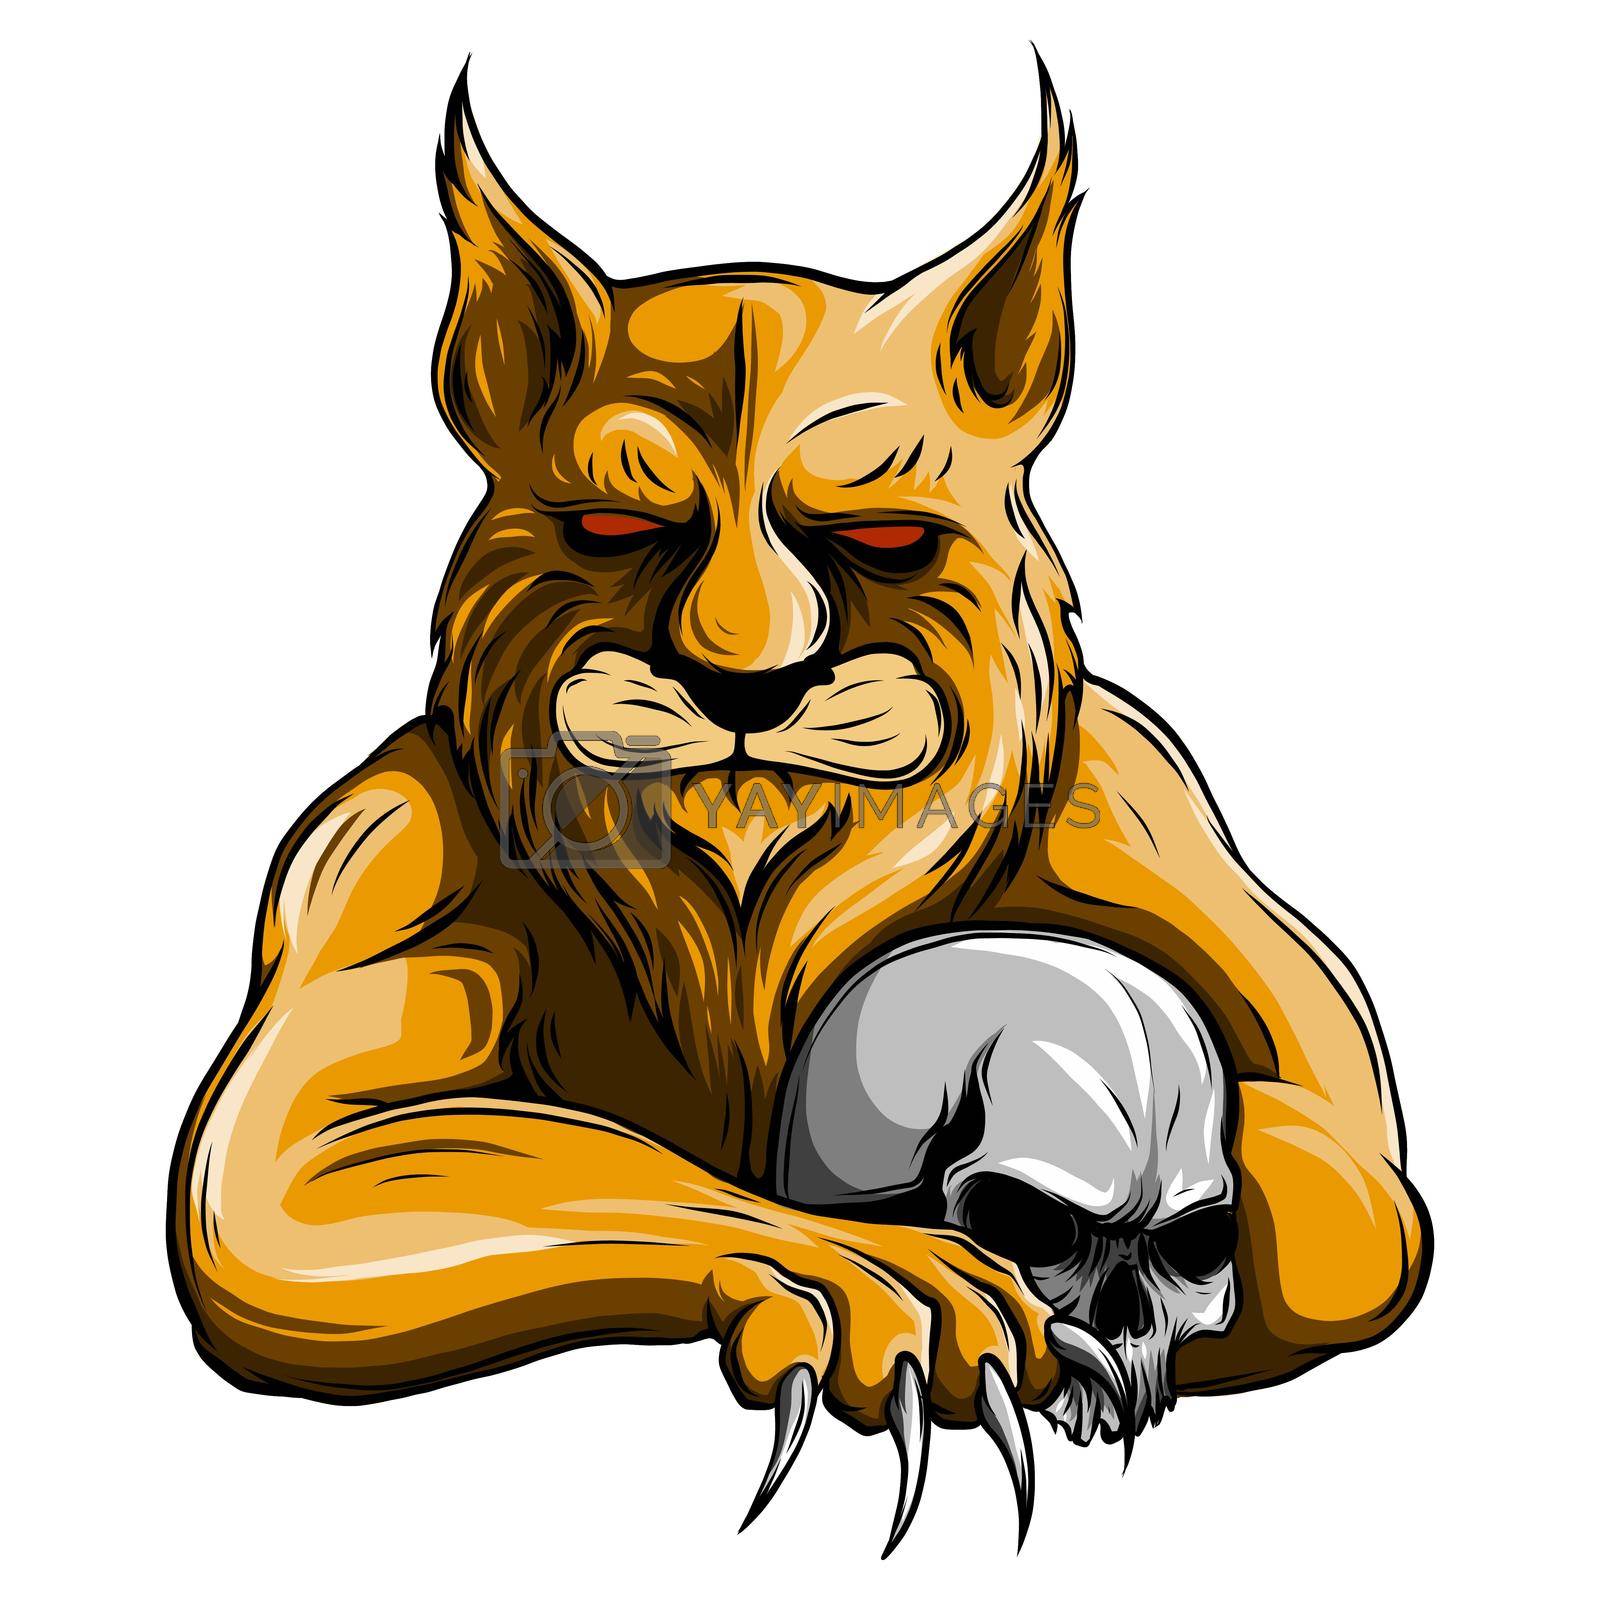 Royalty free image of vector illustration Lynx mascot logo with skull by dean